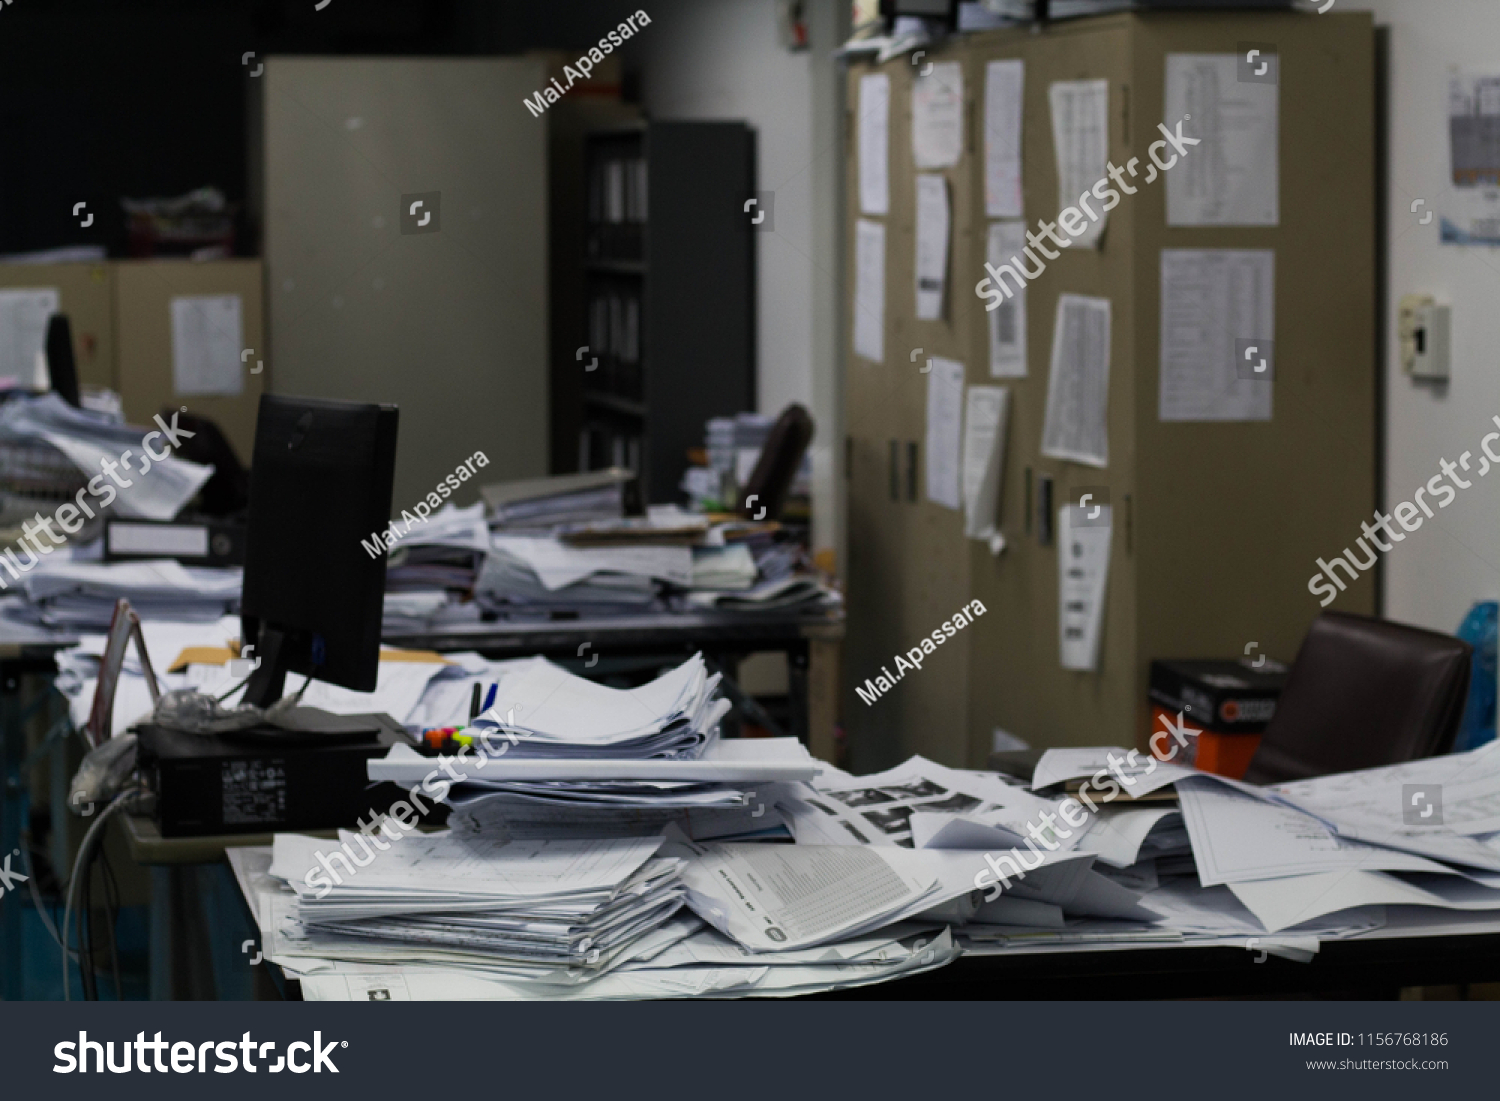 Document Messy Cluttered On Desk Office Stock Photo 1156768186 ...